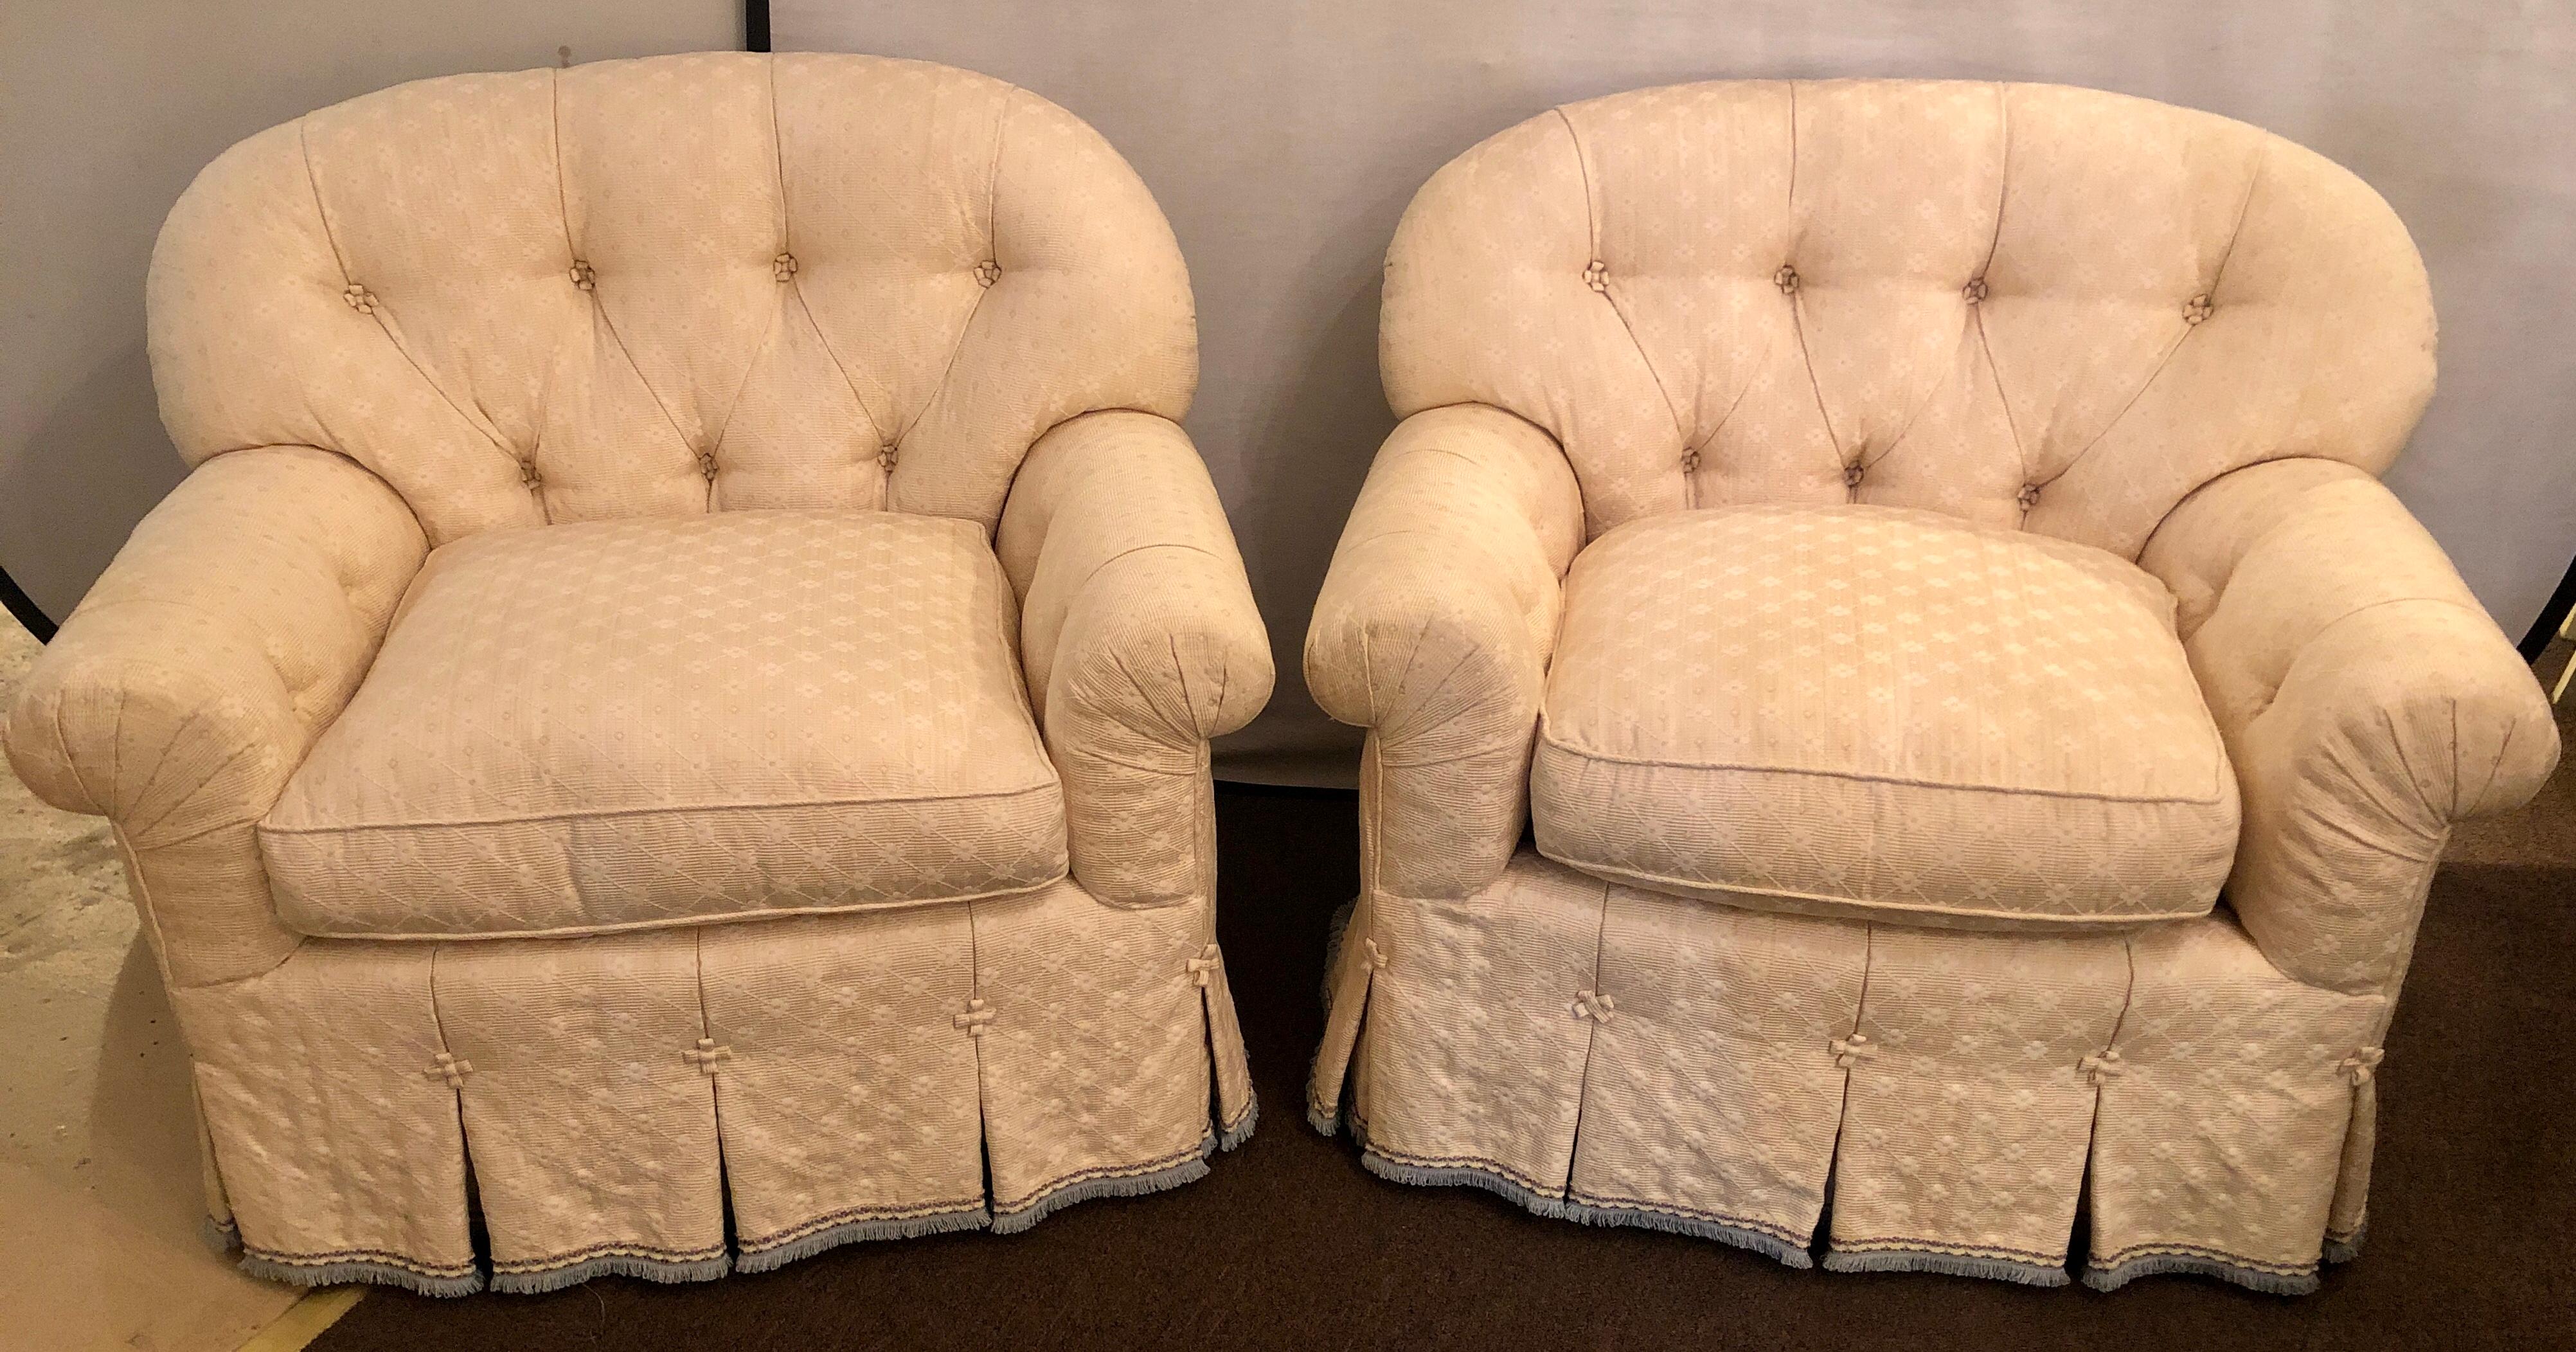 American Pair of Lined and Pleated Spectacular Overstuffed Boudoir or Lounge Chairs